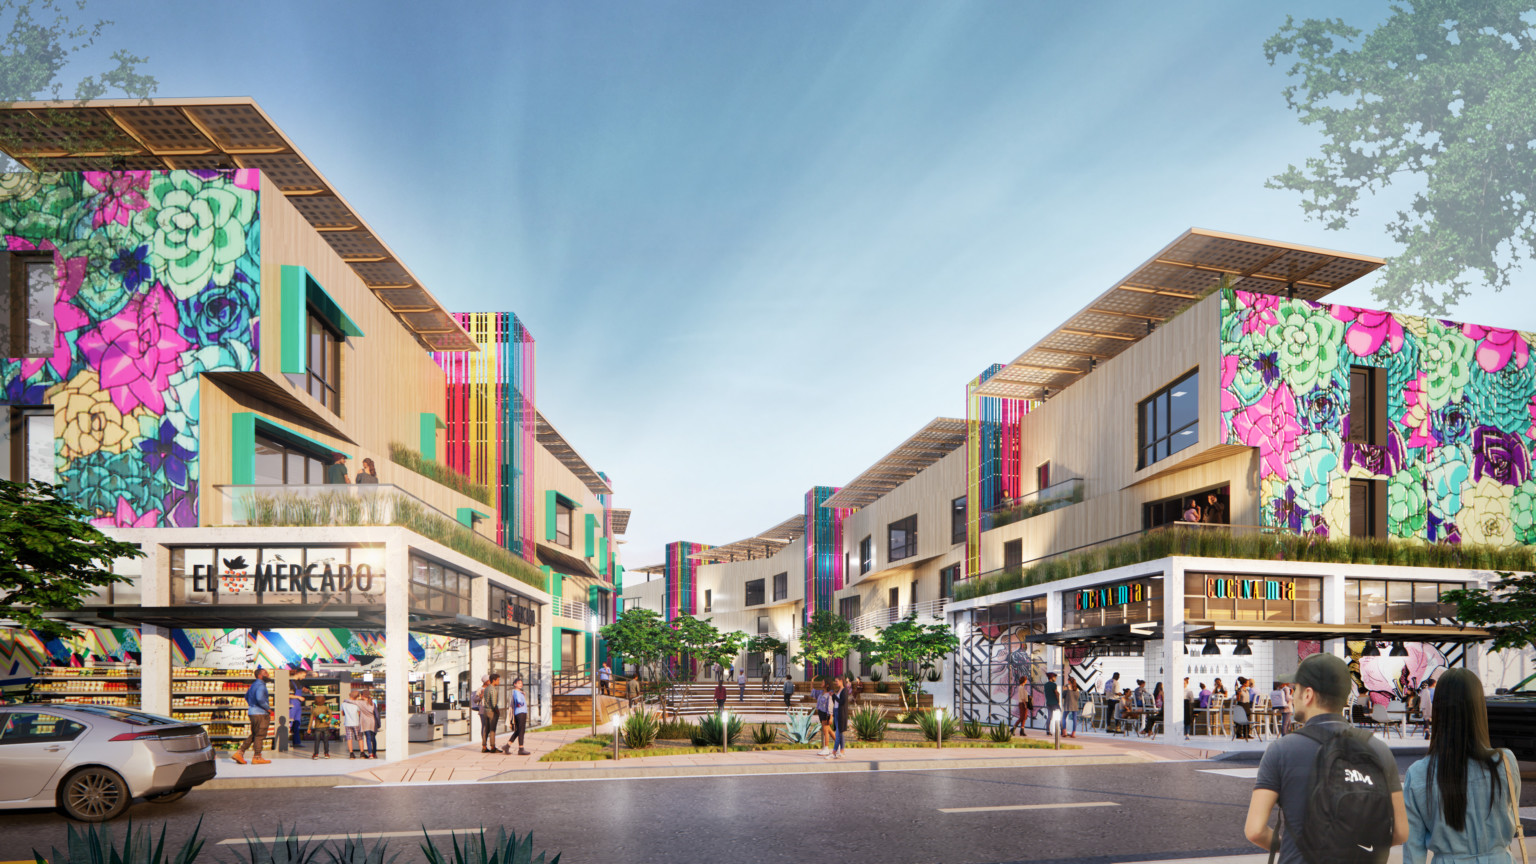 Rendering of mixed-use space including open air restaurants and markets. Colorful multi-story building design